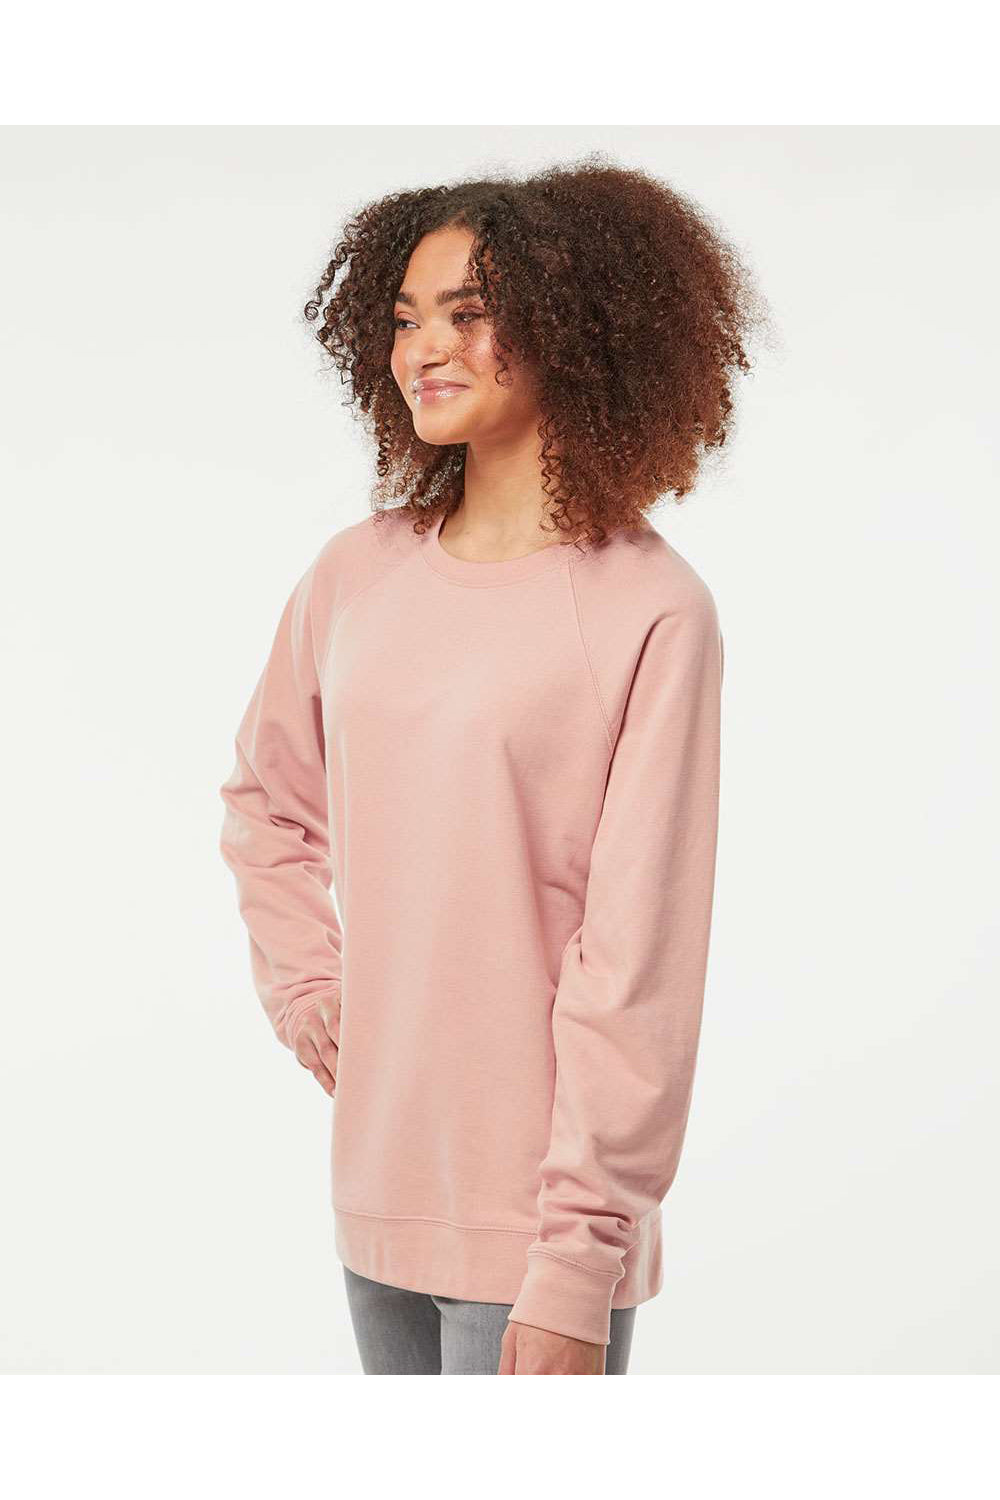 Independent Trading Co. SS1000C Mens Icon Loopback Terry Crewneck Sweatshirt Rose Pink Model Side